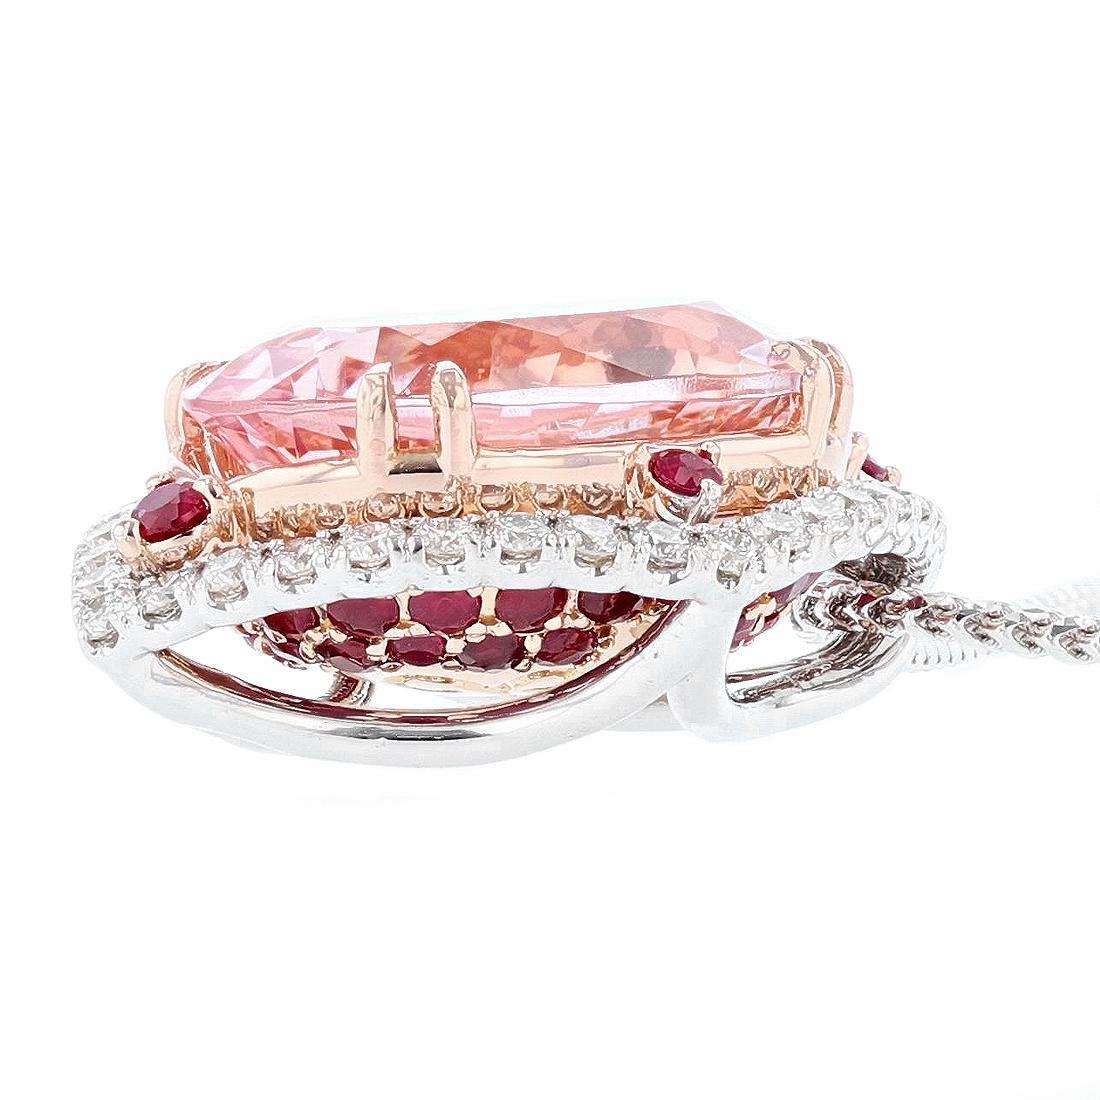 This necklace is made in 14k white gold and is designed by Nazarelle. It features a 10.79ct oval cut Morganite, prong set, for the center stone. There are 36 round cut diamonds weighing 0.80ct, prong set, on the pendant with Color Grade (G) Clarity